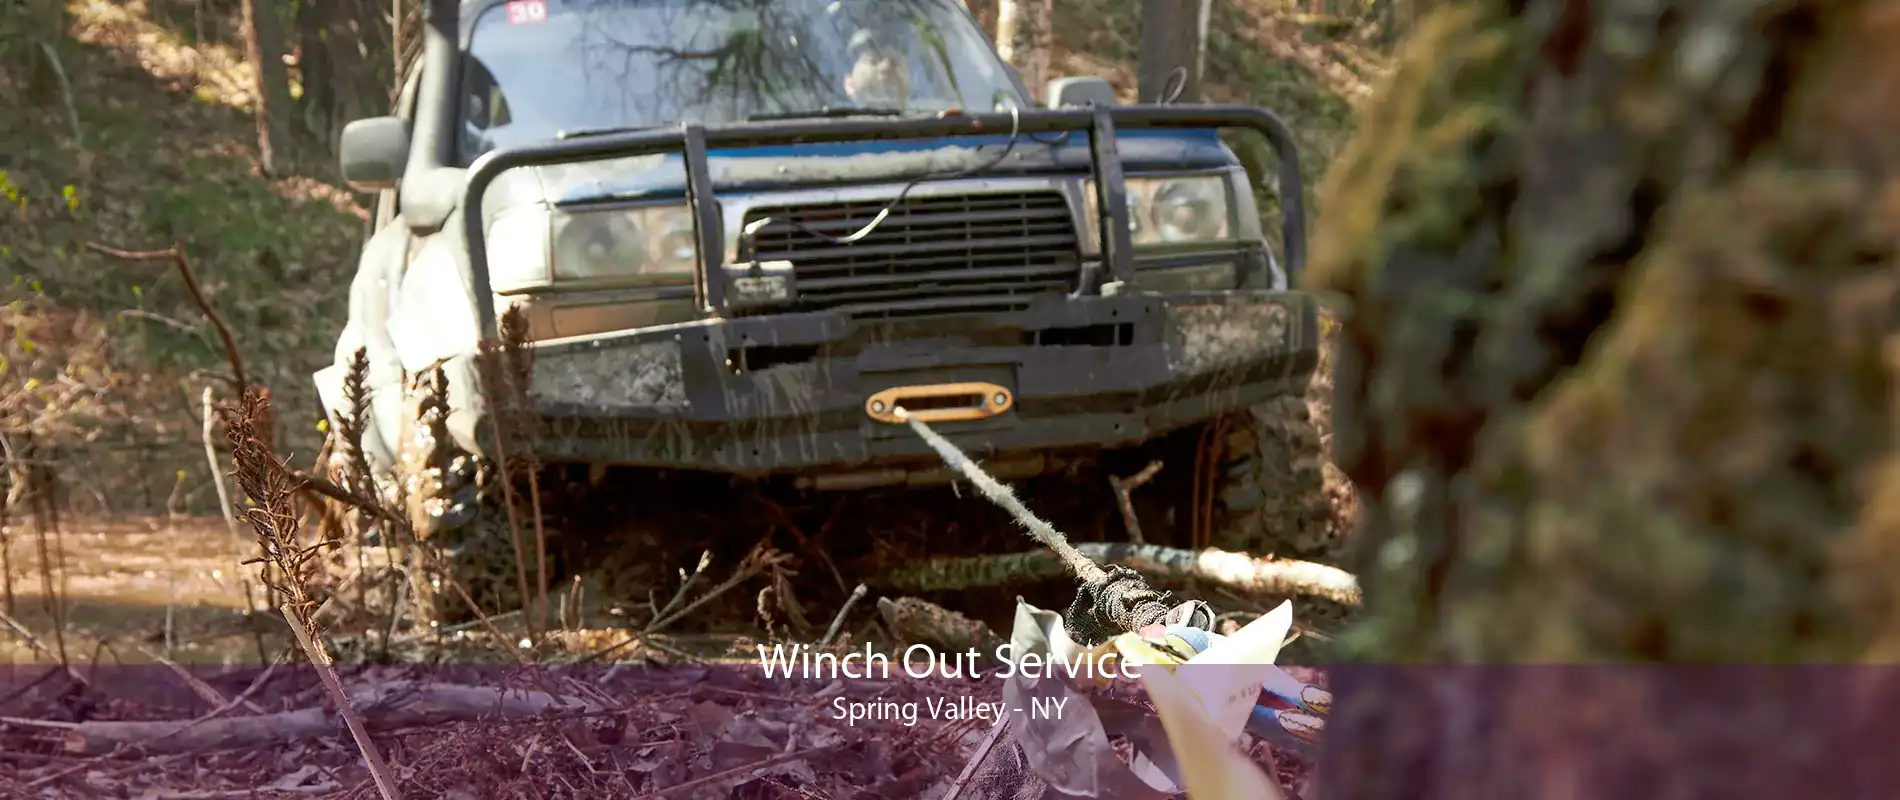 Winch Out Service Spring Valley - NY